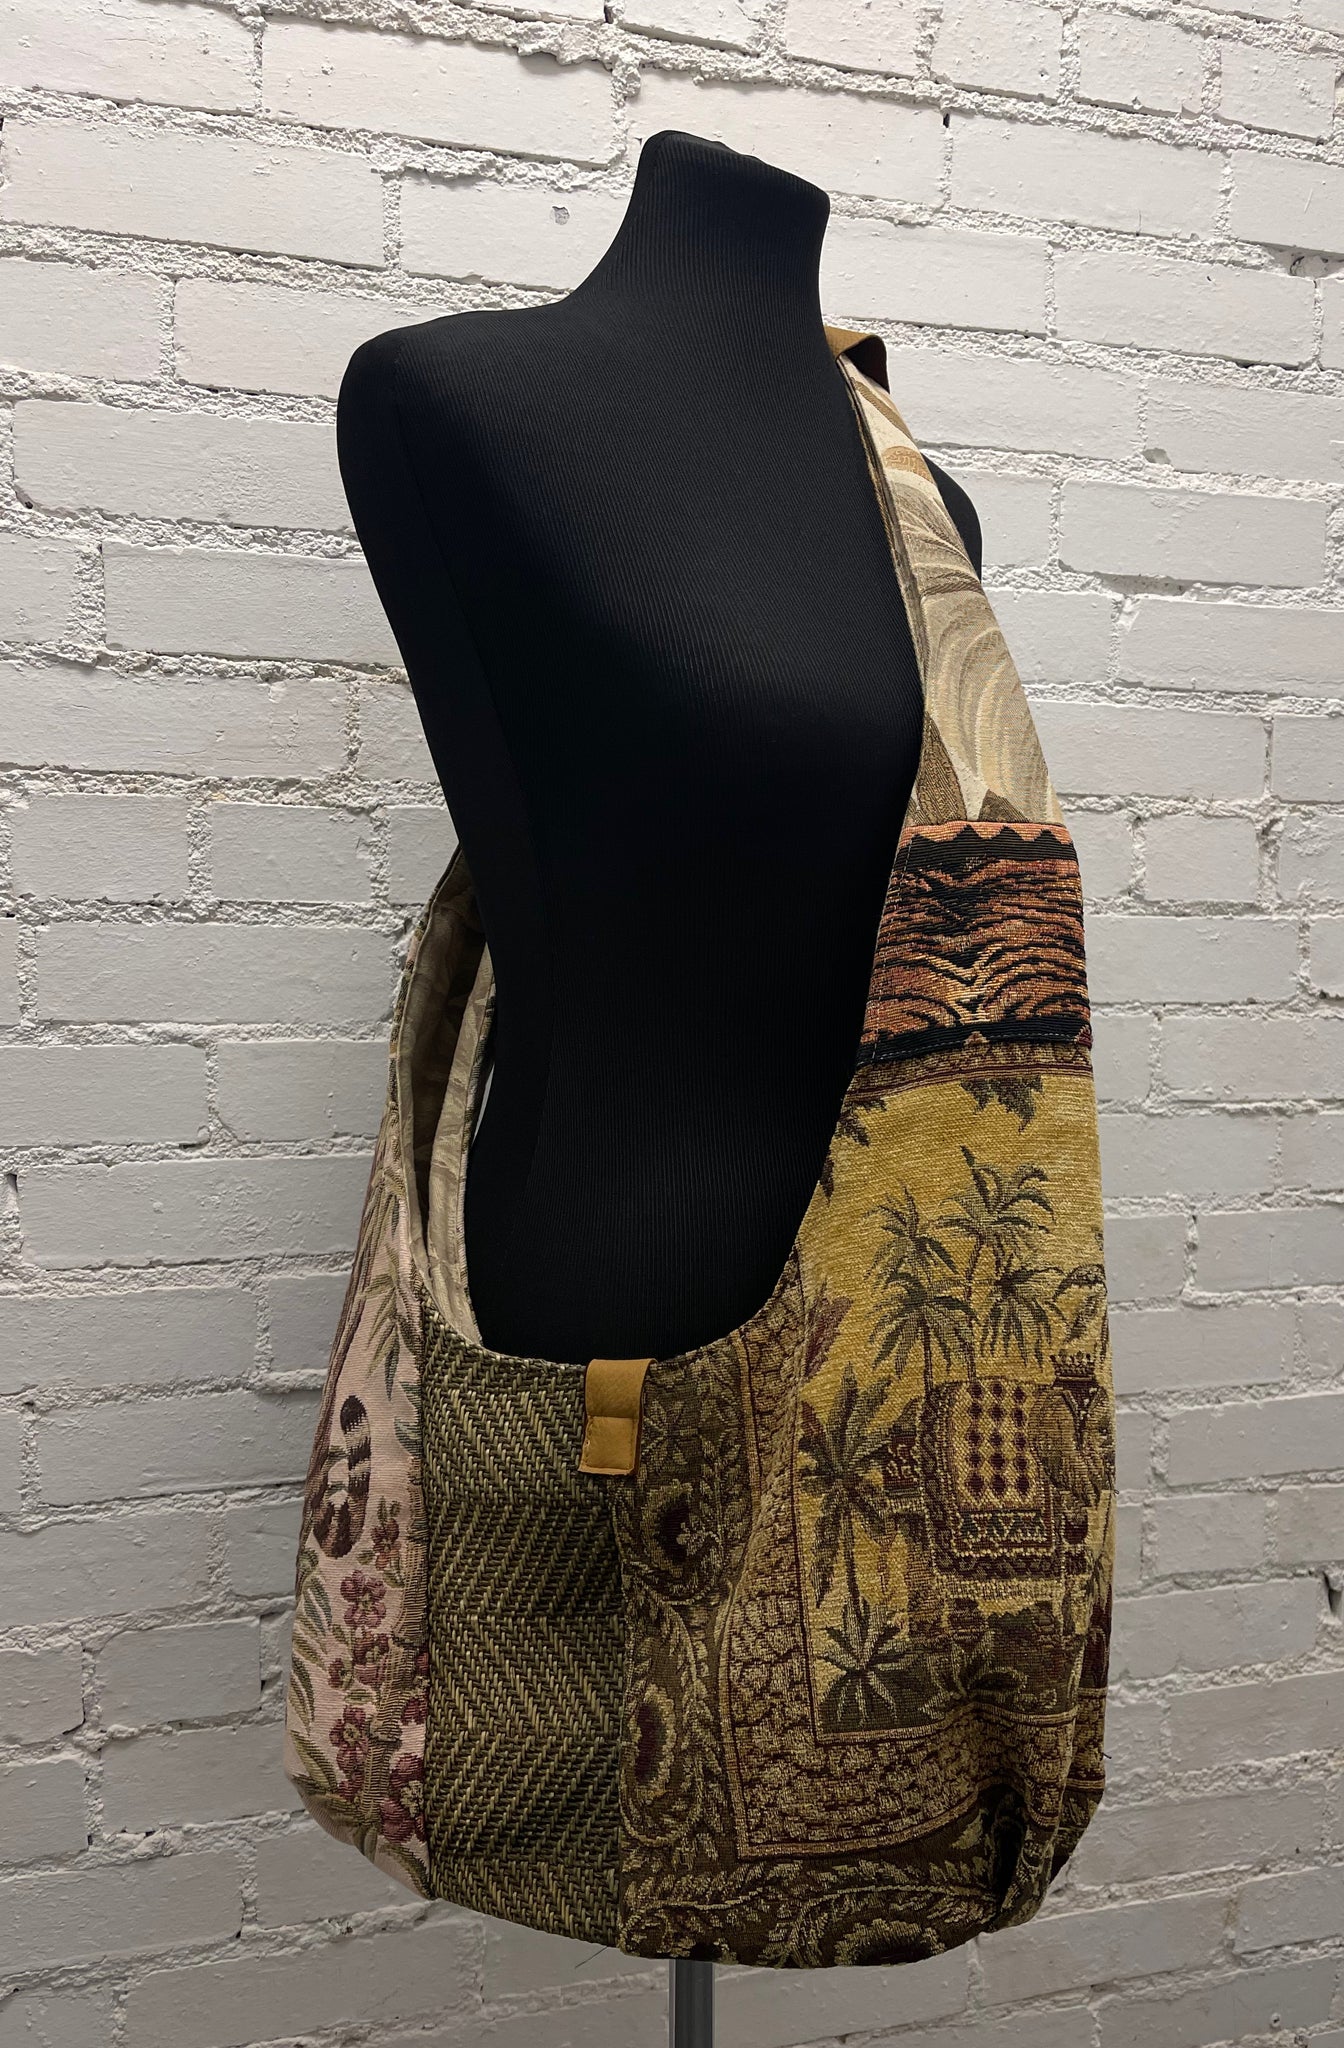 Vintage Tiger Fabric and Tapestry Bag – Lucy Clark Gallery and Studio